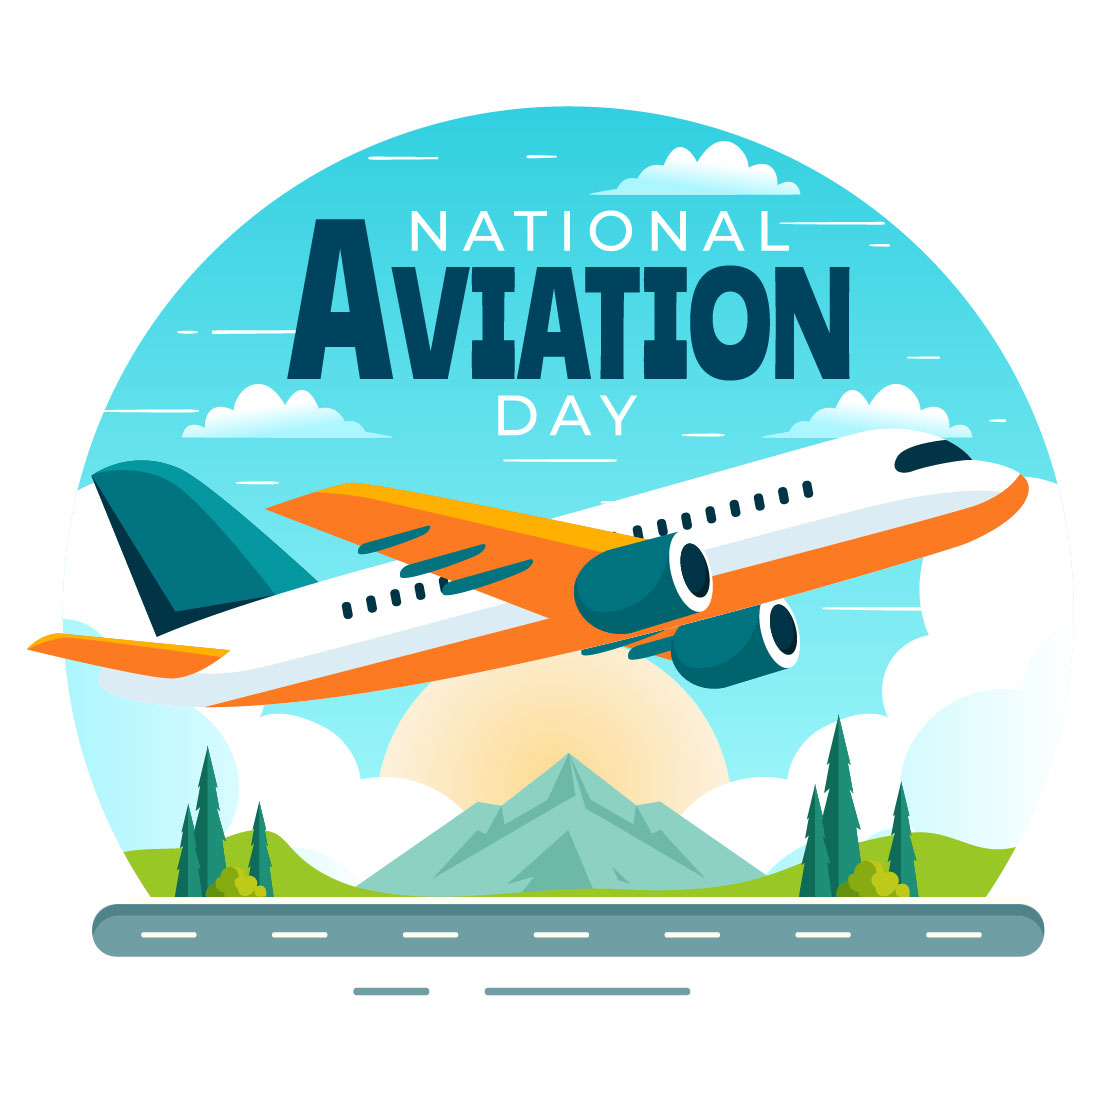 13 National Aviation Day Illustration cover image.